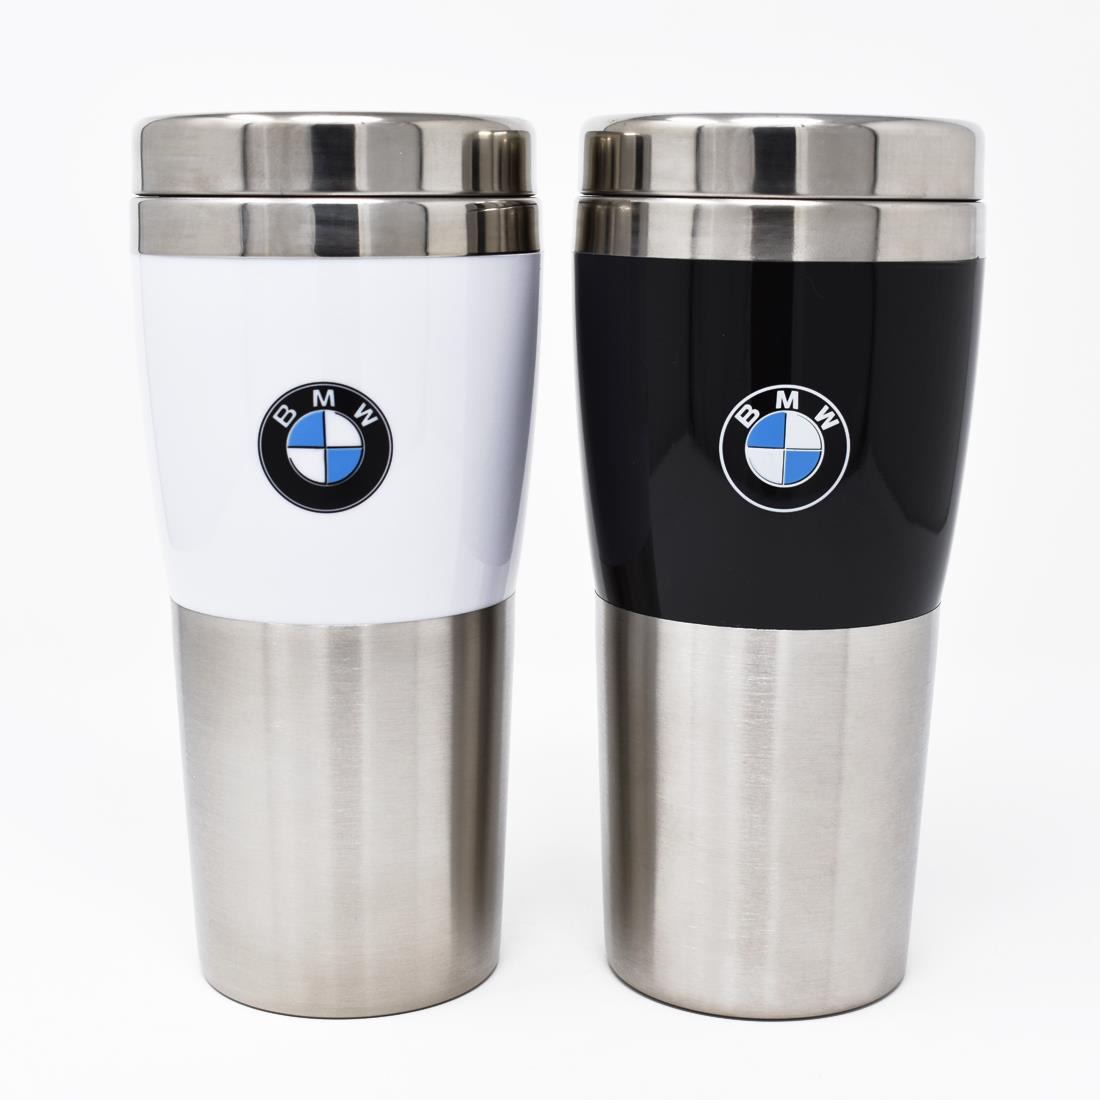 Bmw Oem Travel Tumbler - Stainless Steel 80-23-5-A57-8E8